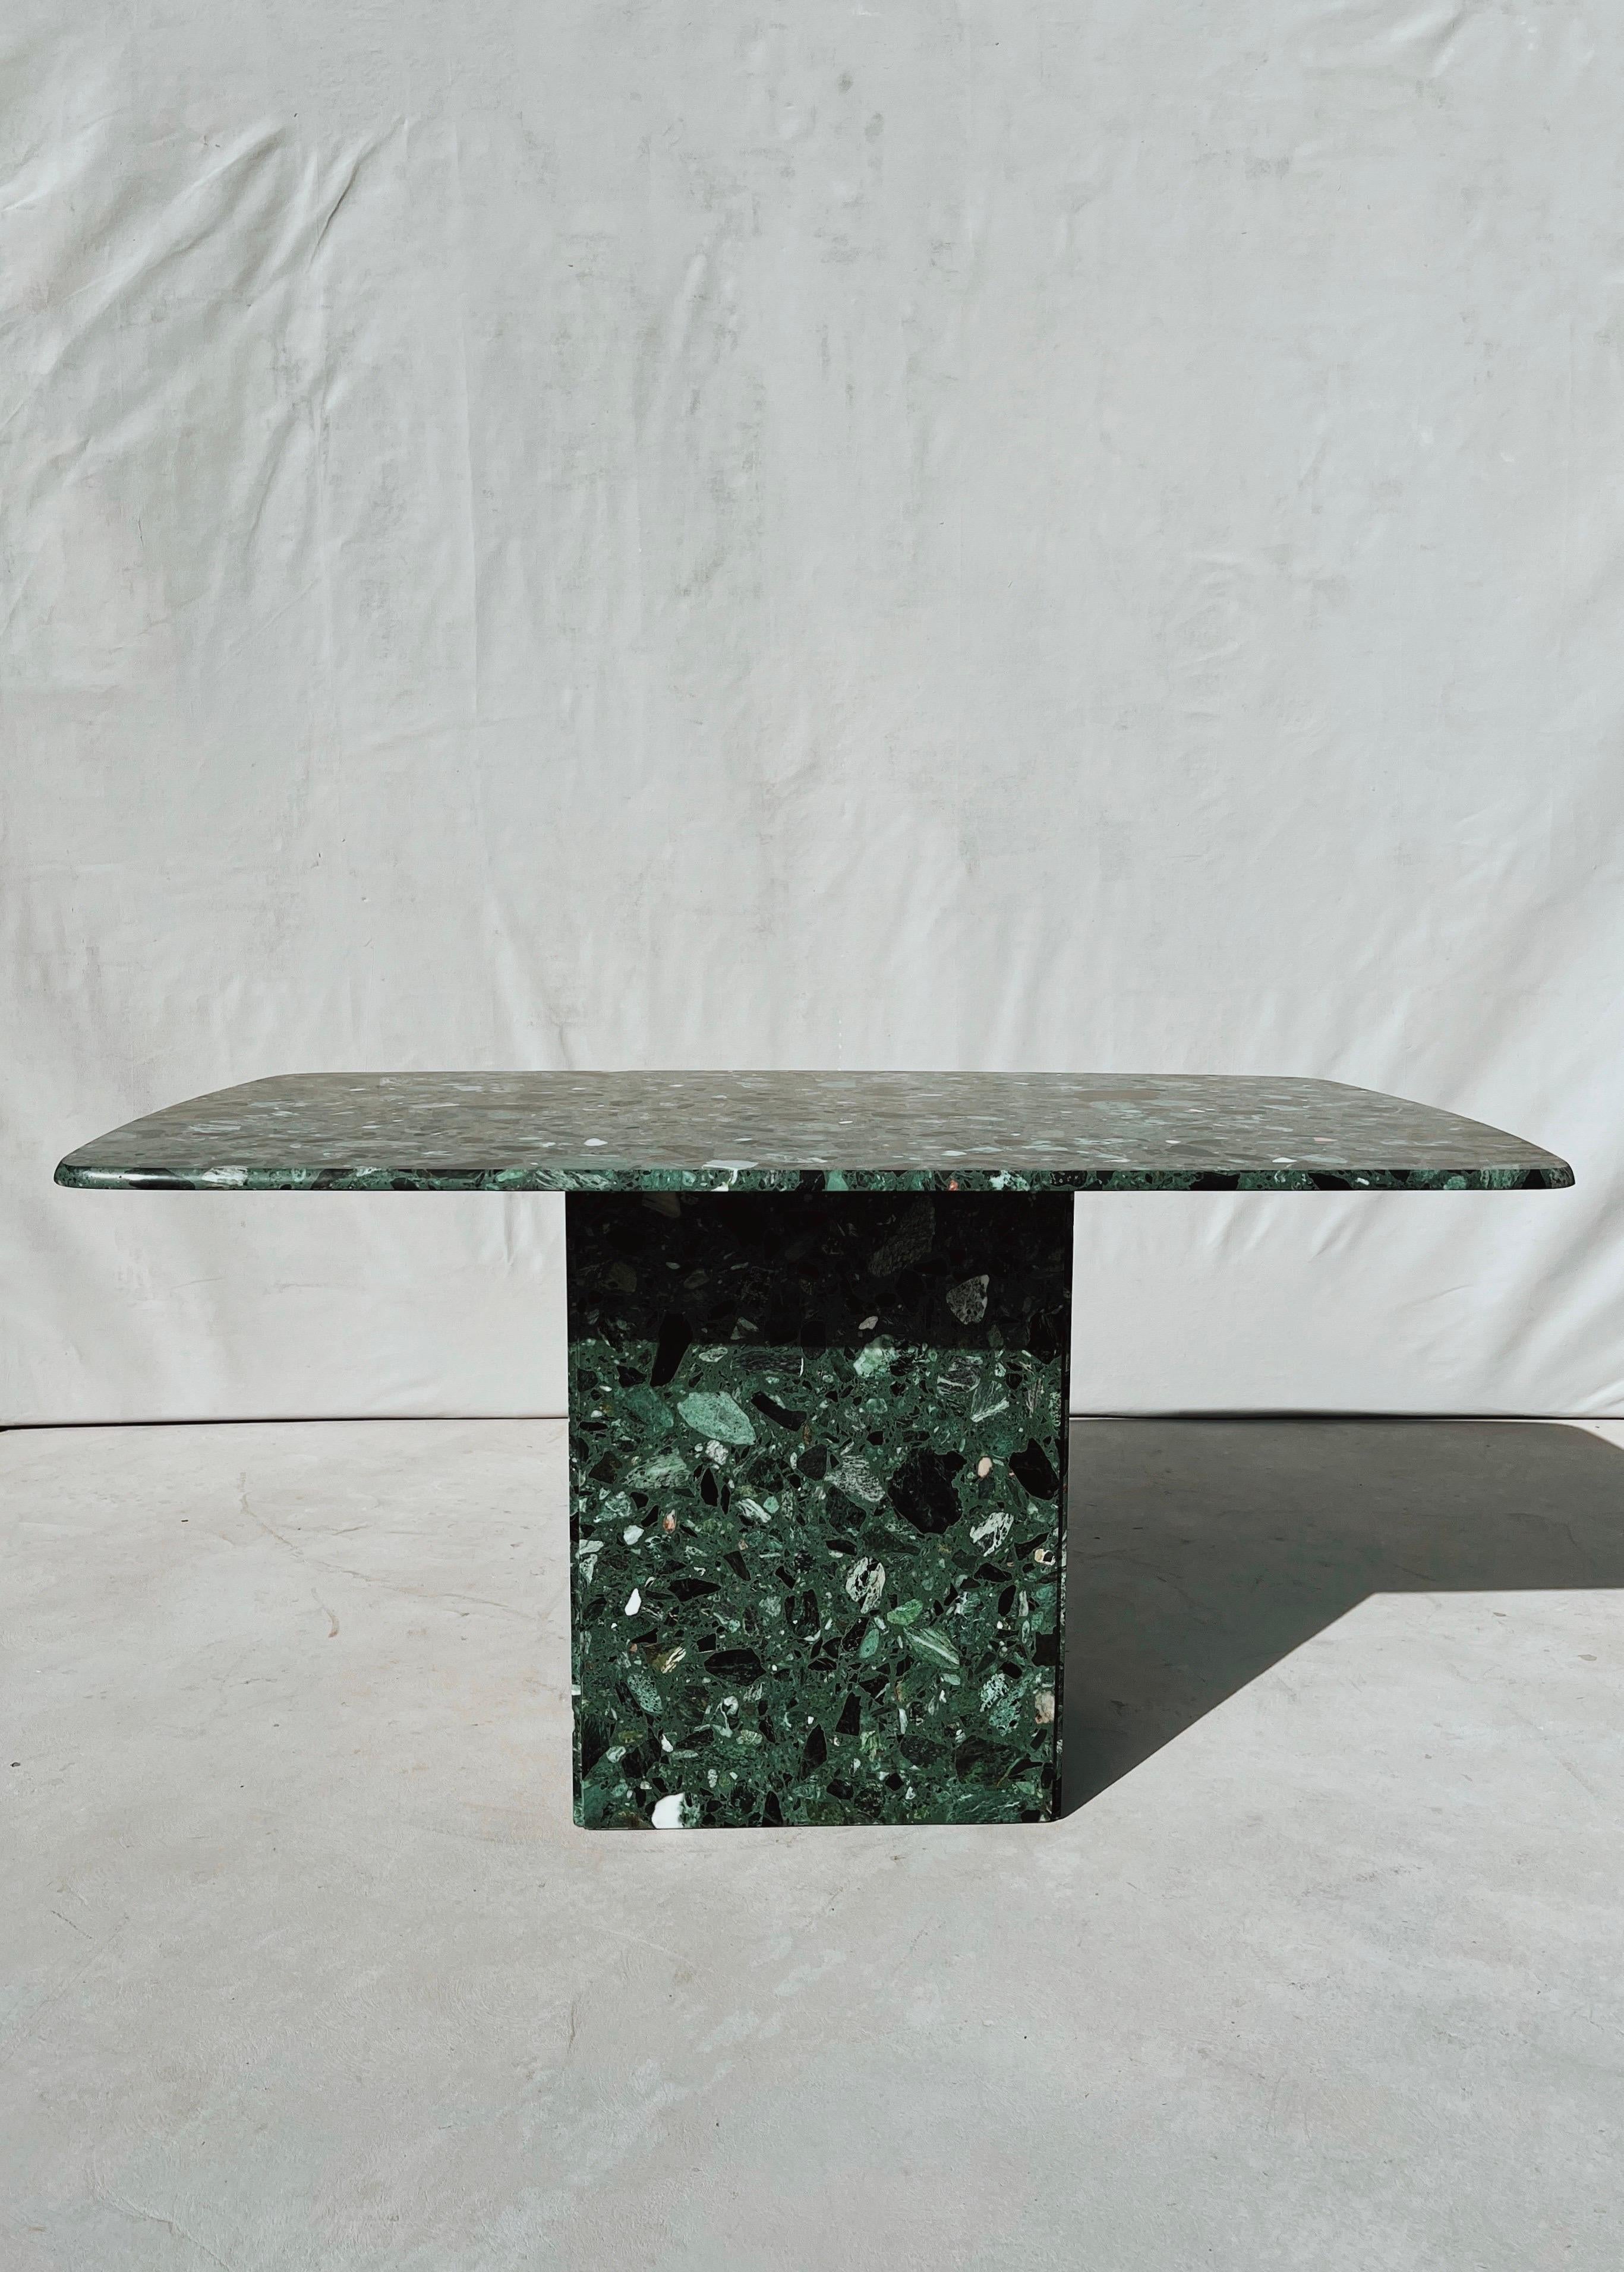 Vintage Terrazzo Italia Green Marble Rectangular Dining Table, Attributed to Ello

This dining table has the 